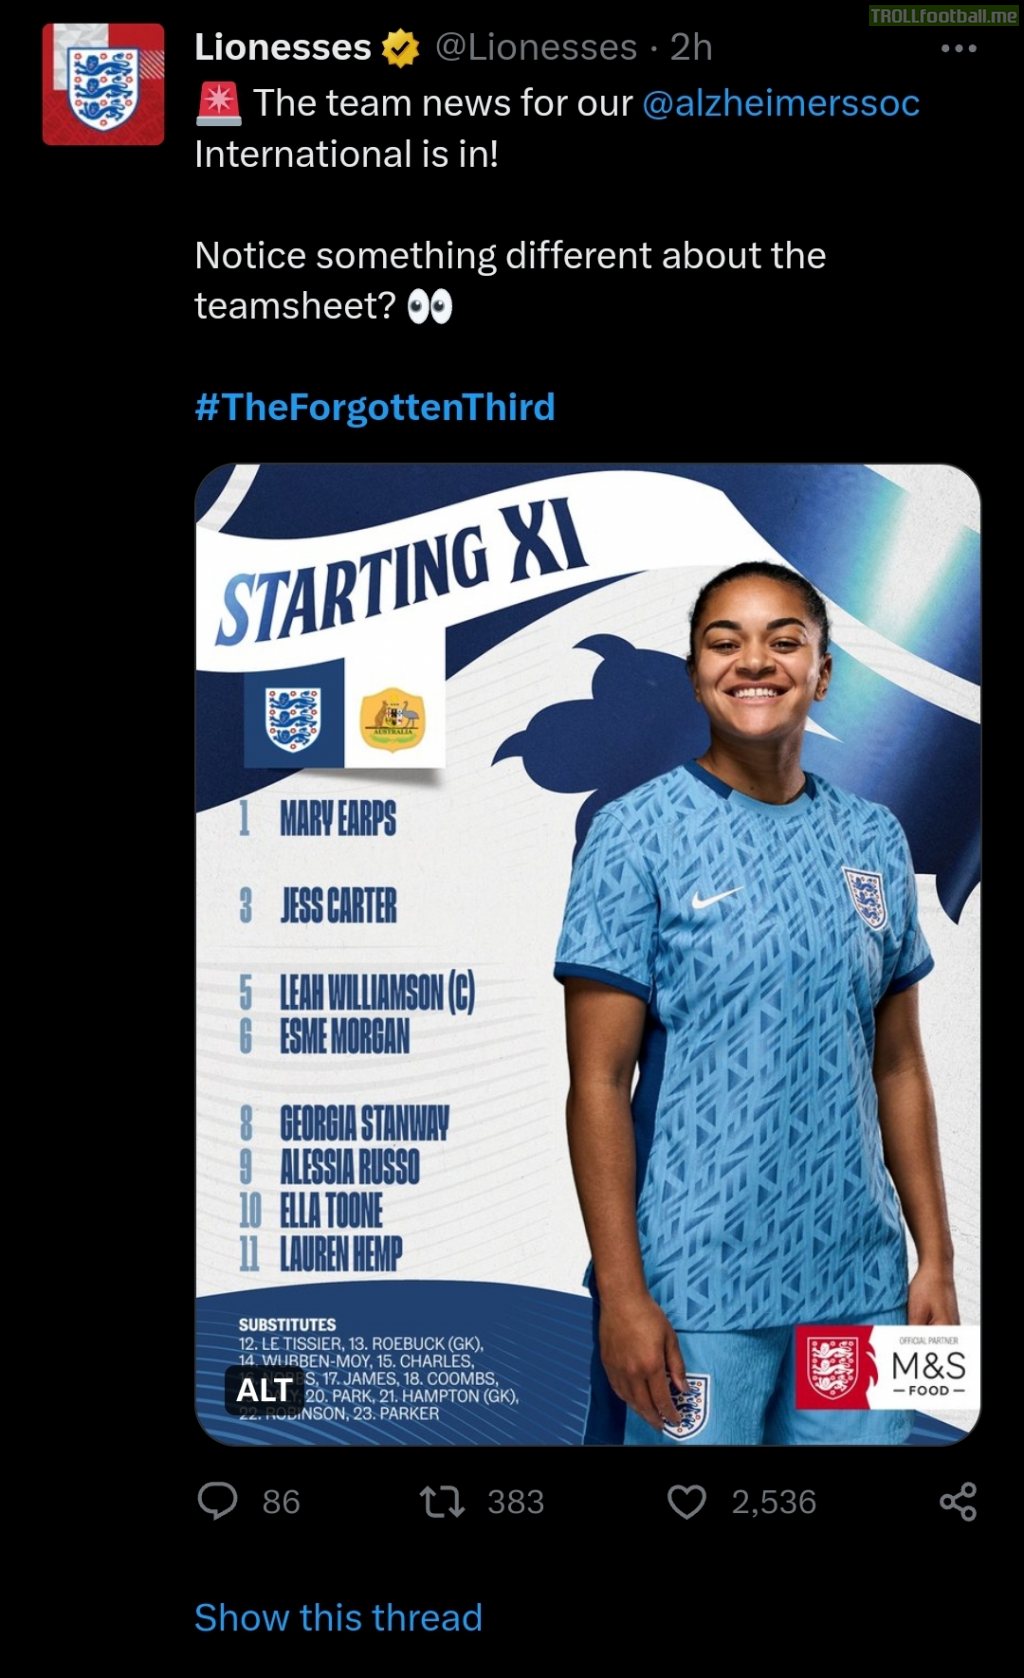 England Women's twitter account promoting Alzheimer's Society by missing names off the teamsheet